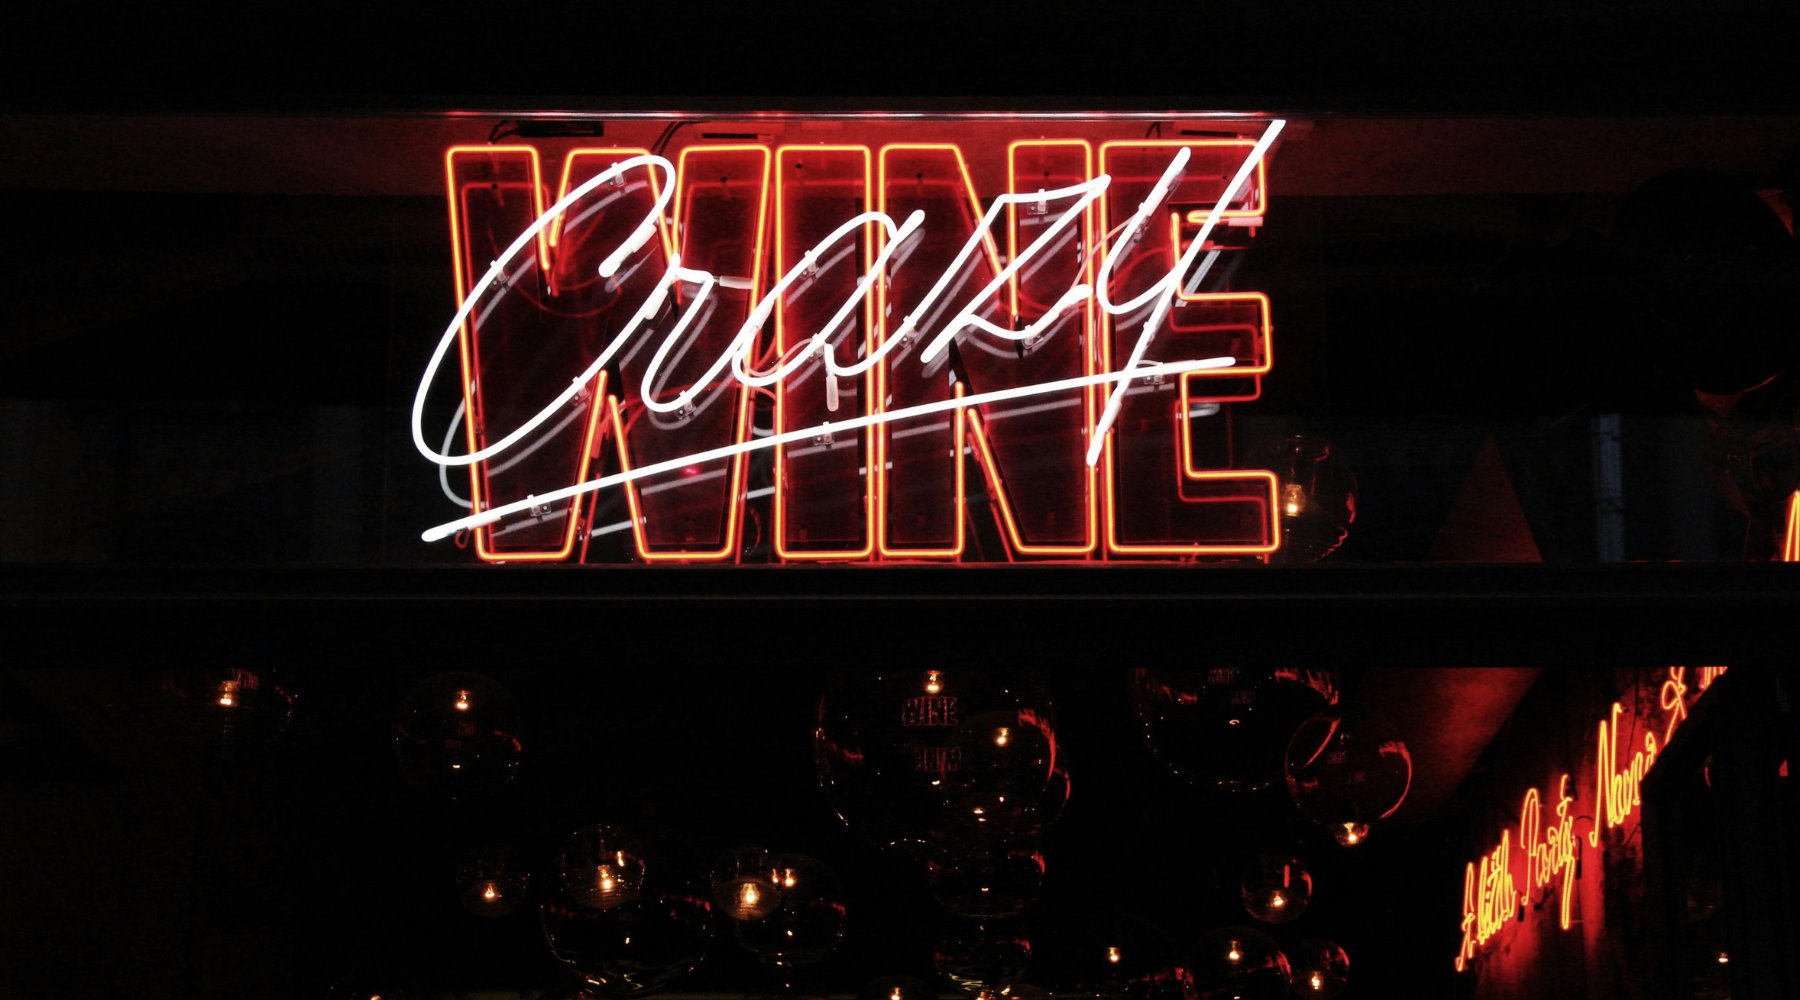 Neon Signage for Bachelor Parties